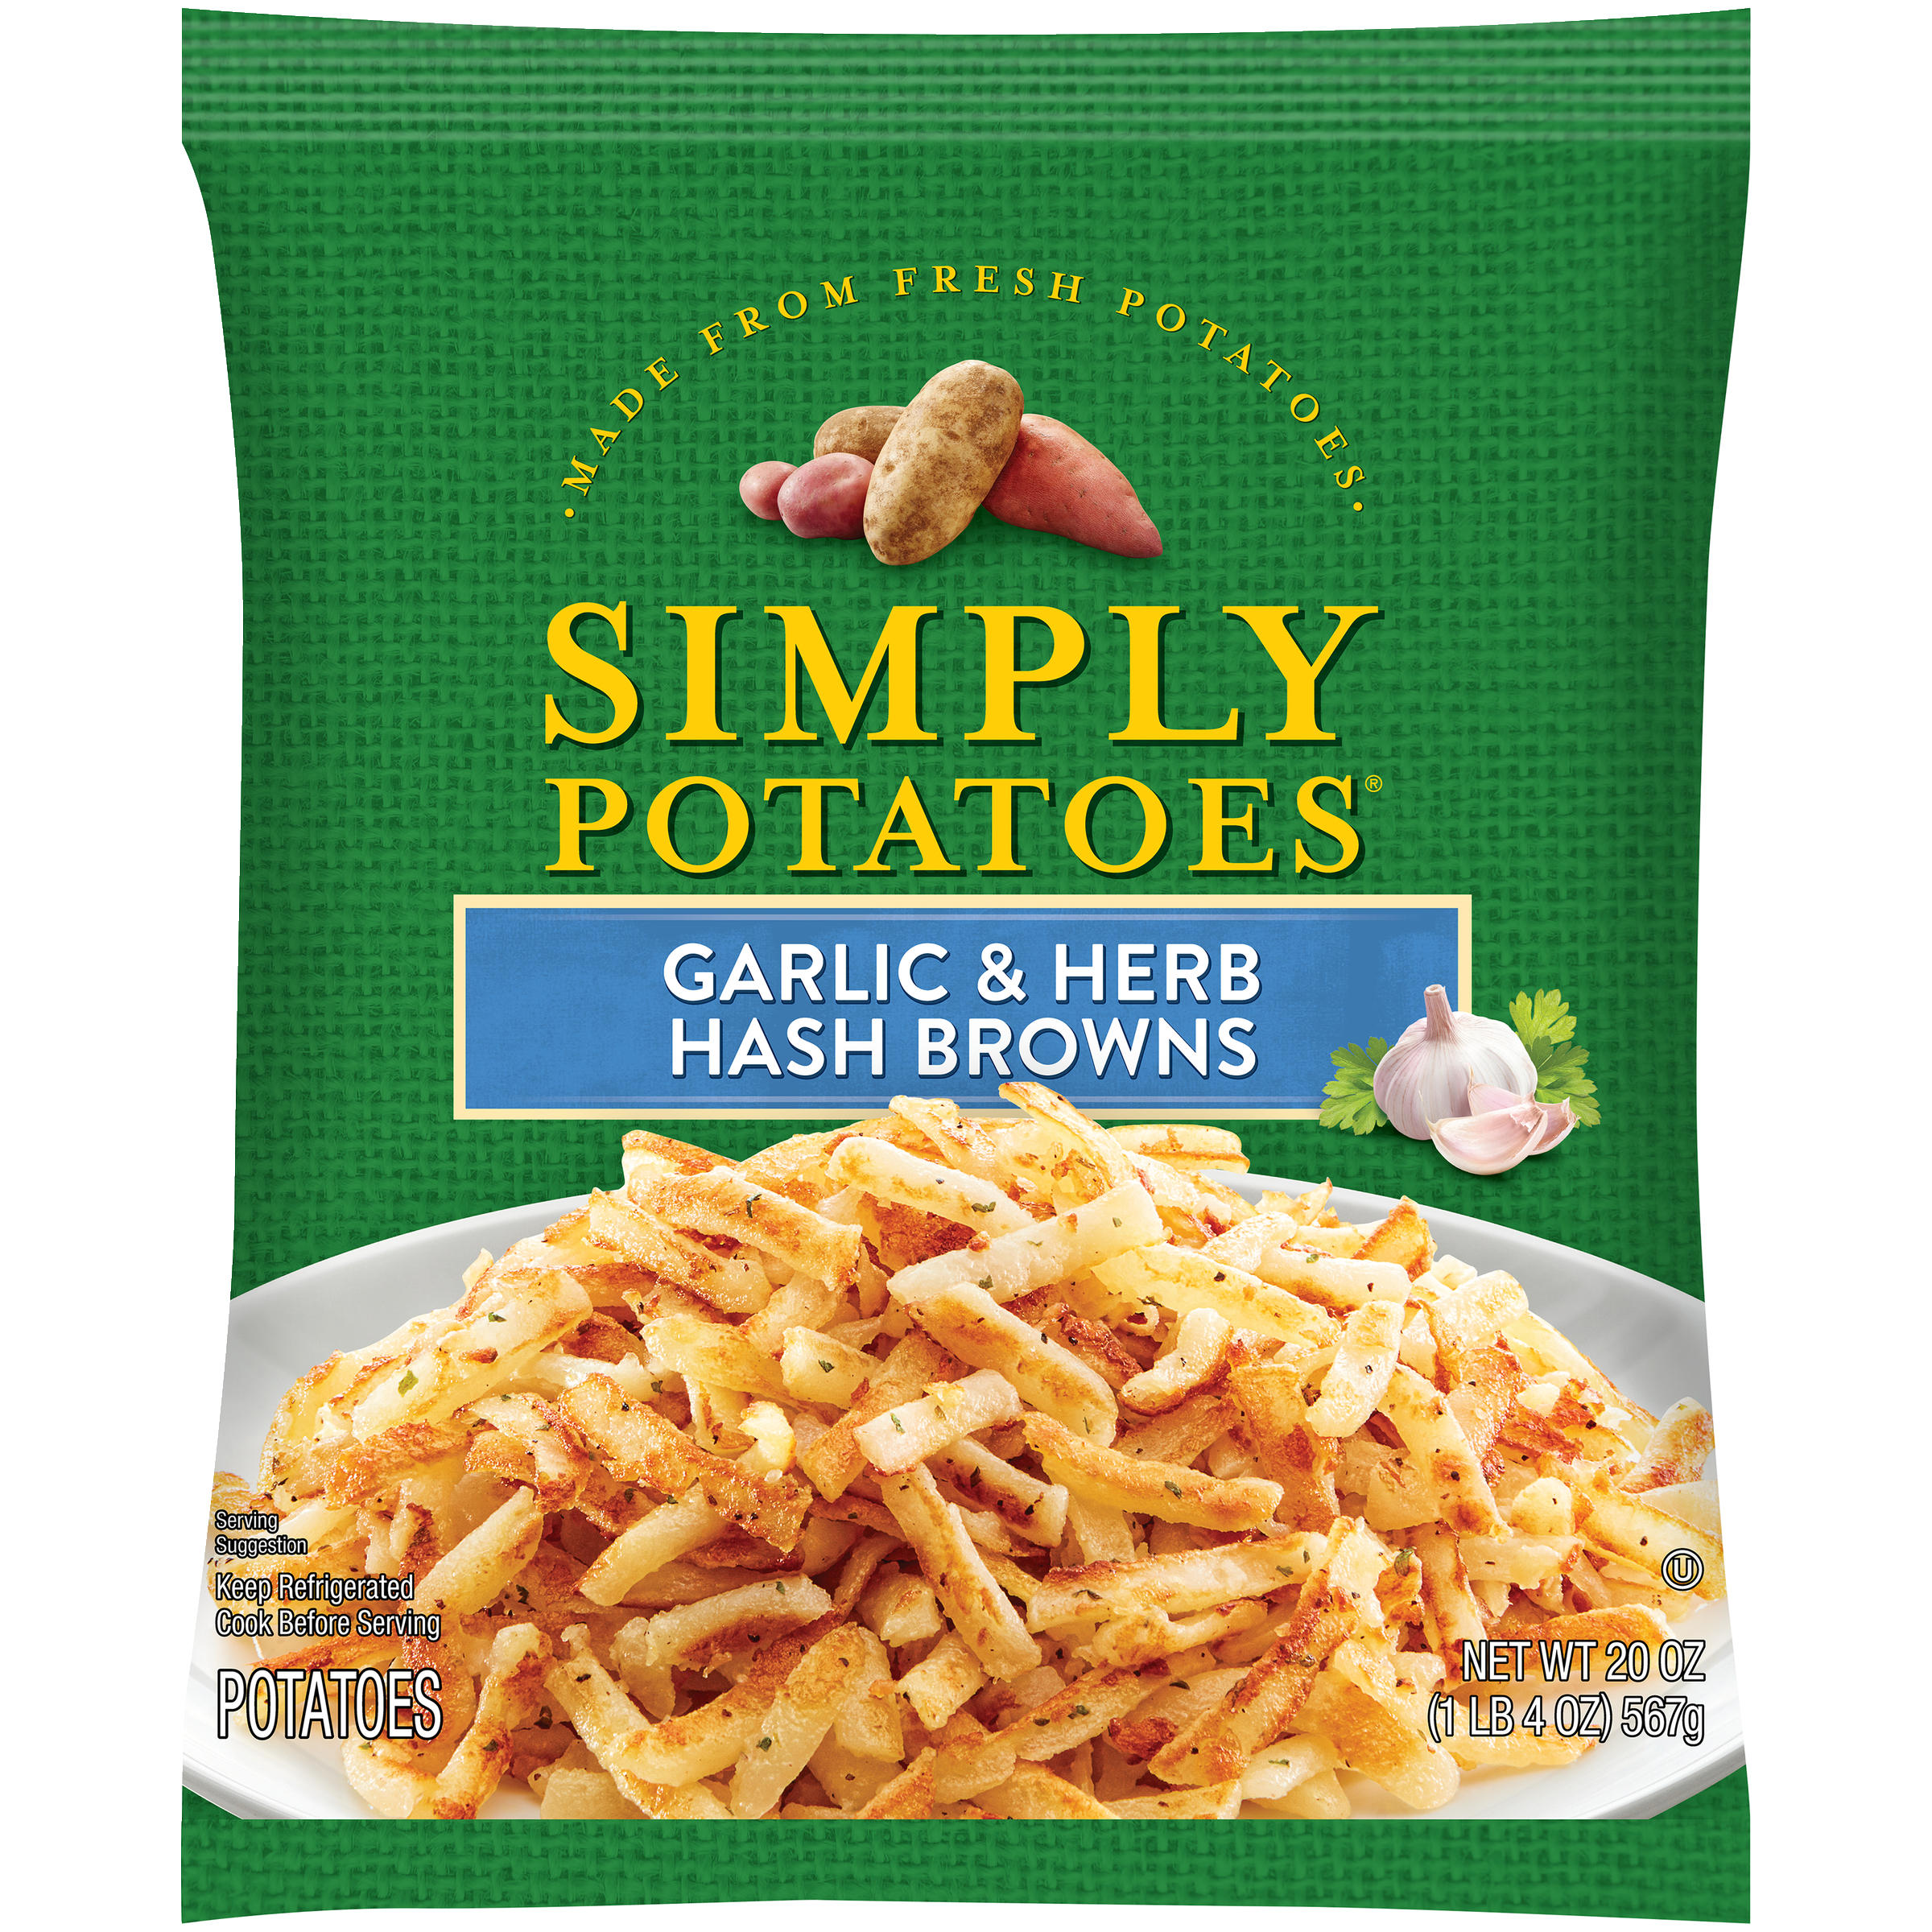 Simply Potatoes Garlic and Herb Hash Browns product image